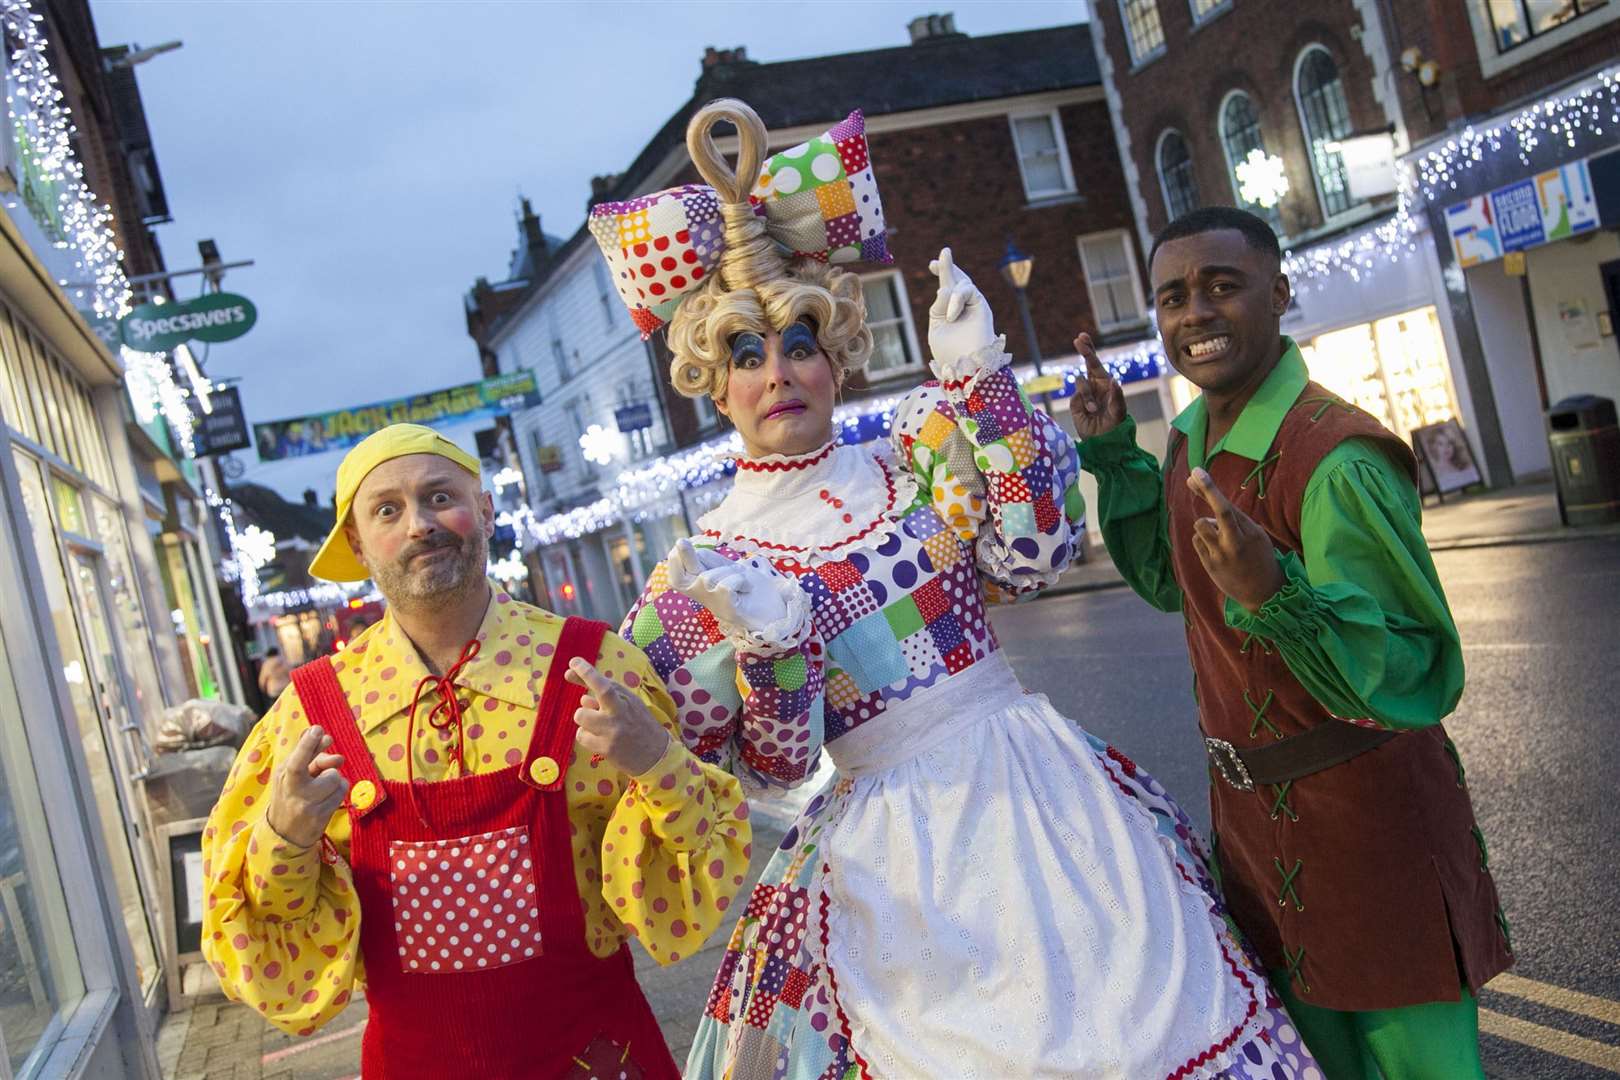 The Sevenoaks Panto will be staged virtually as the cast wait to hear about their scheduled stage dates